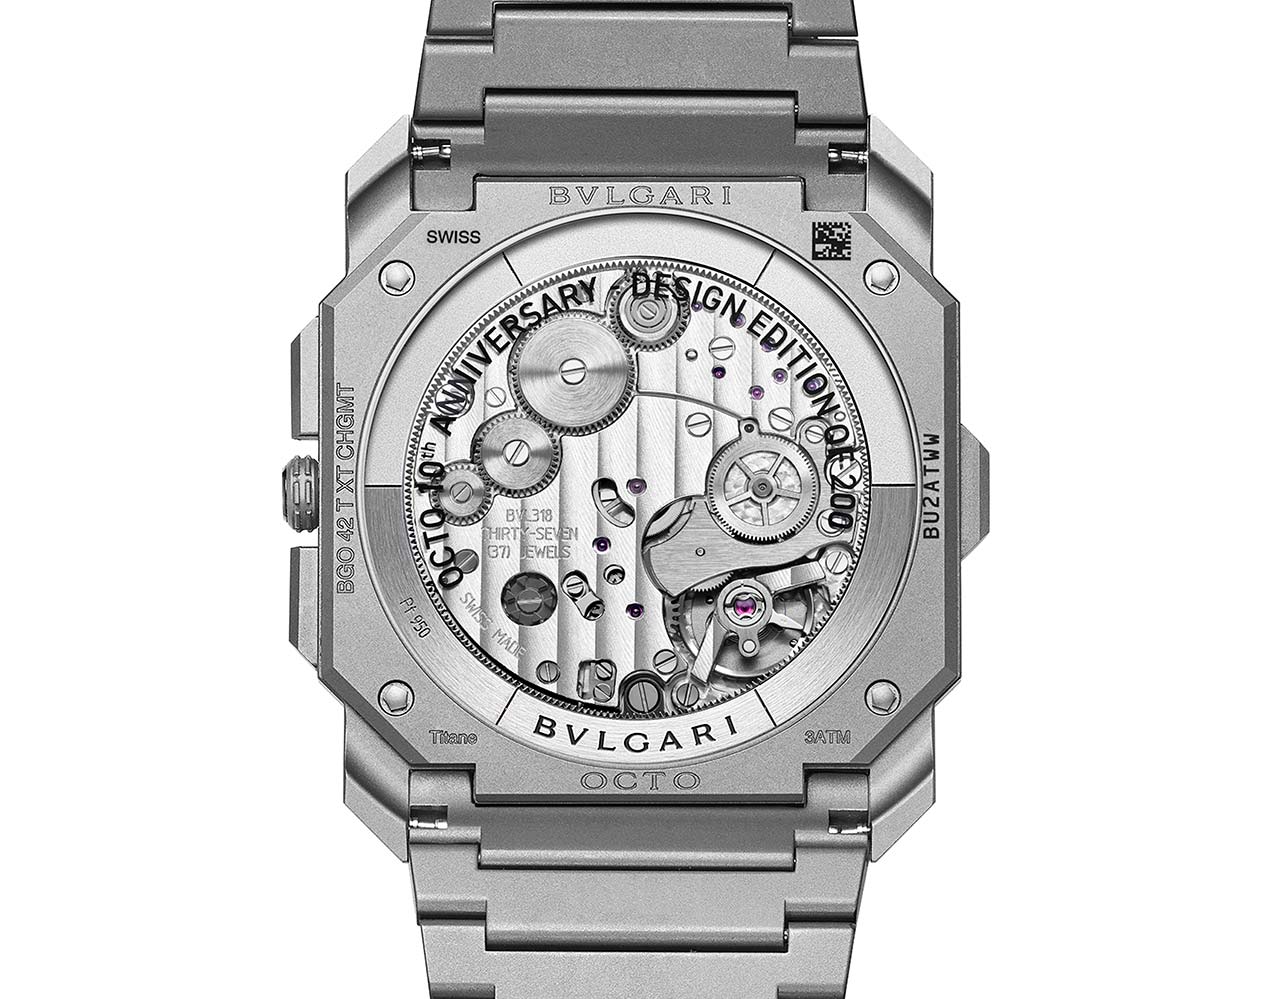 Bulgari - Octo Finissimo 2022 10th Anniversary Editions | Time and Watches  | The watch blog